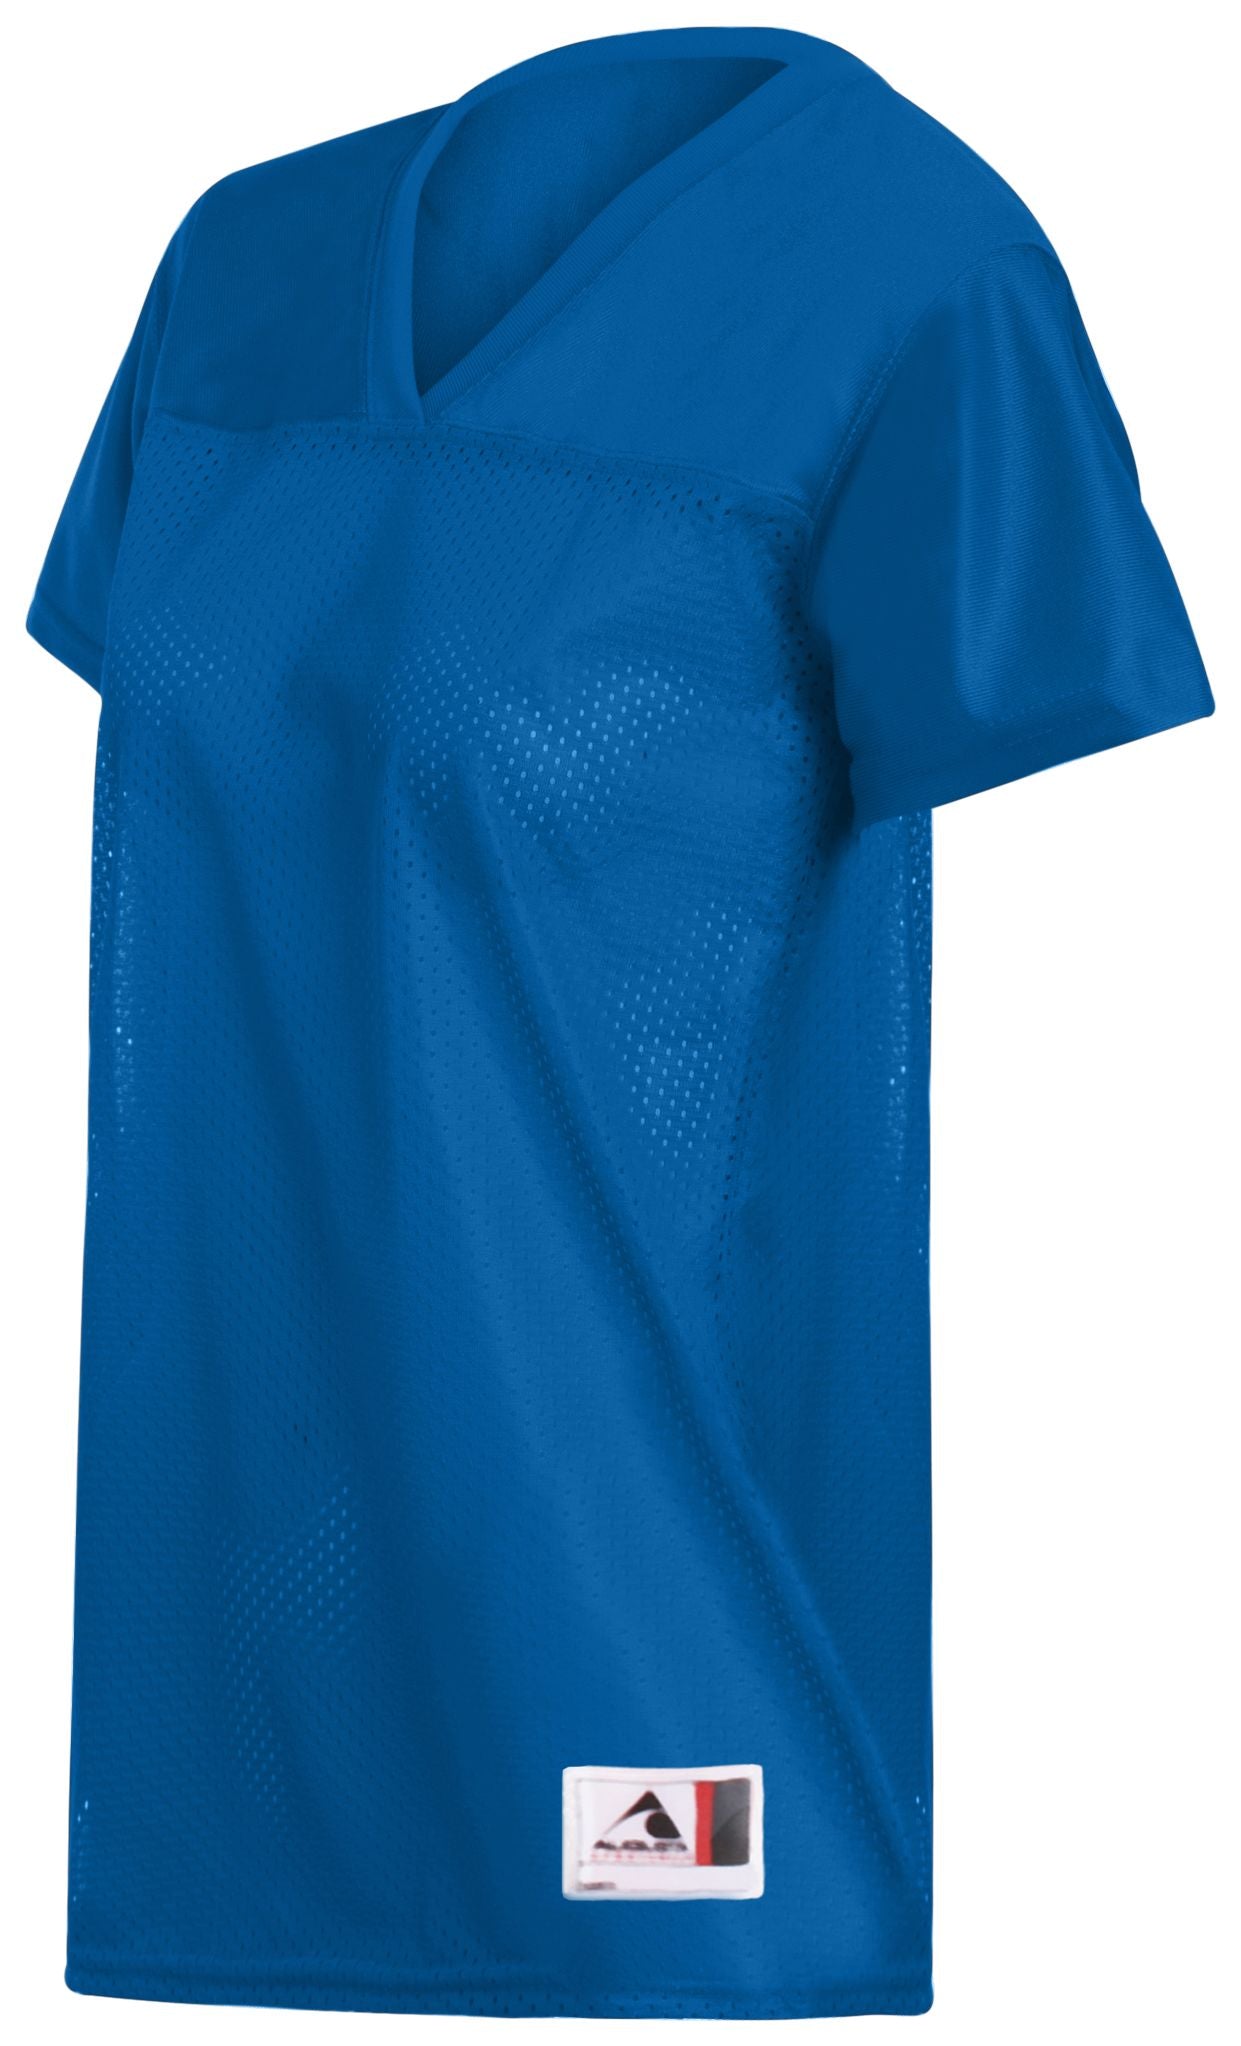 Augusta Sportswear Ladies Replica Football Tee in Royal  -Part of the Ladies, Ladies-Jersey, Augusta-Products, Football, Shirts, All-Sports, All-Sports-1 product lines at KanaleyCreations.com